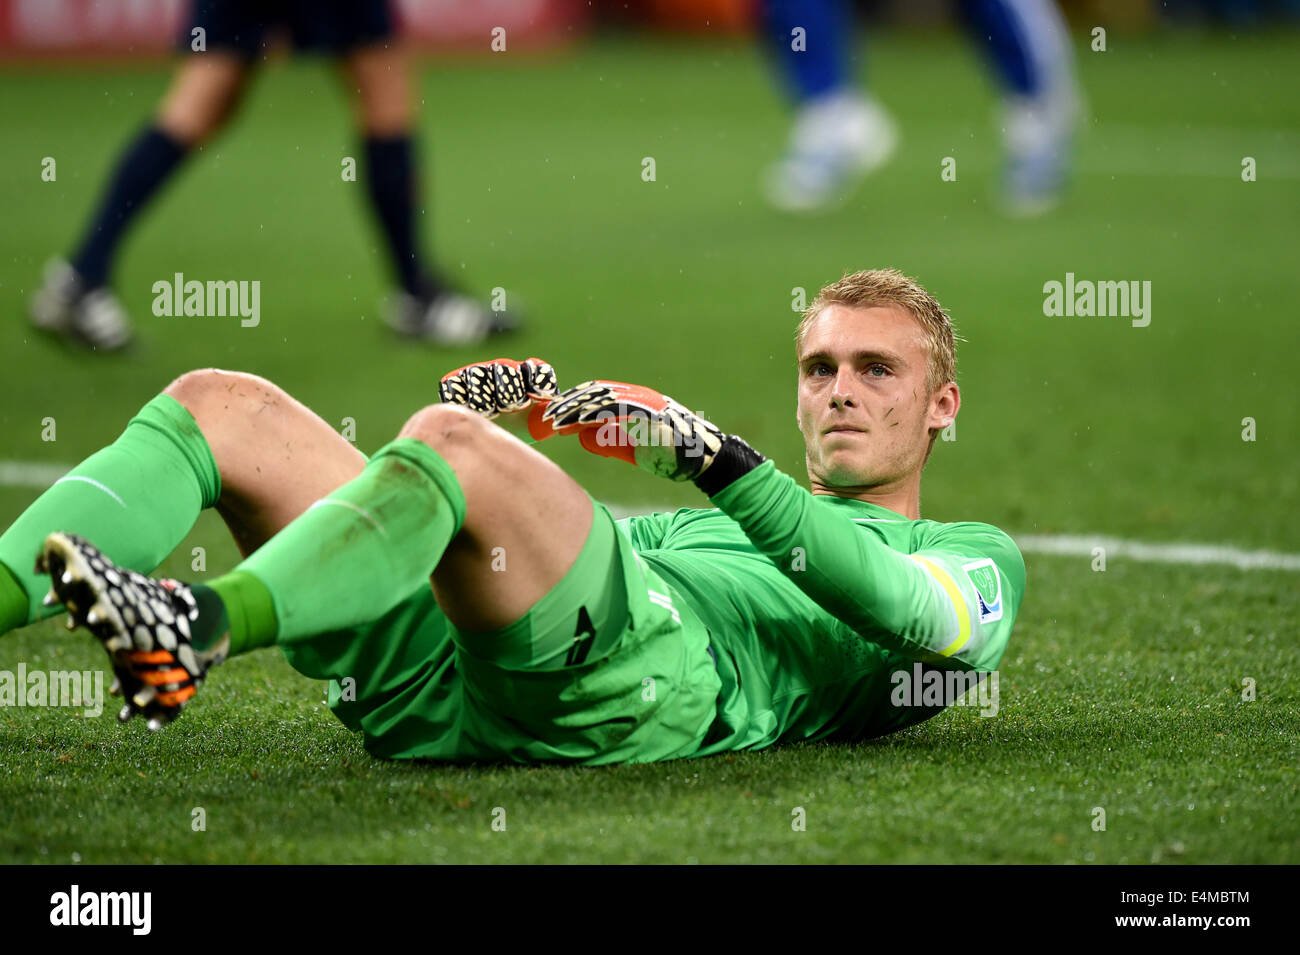 Sao Paulo, Brazil. 9th July, 2014. Jasper Cillessen (NED) Football/Soccer : Jasper Cillessen of Netherlands looks dejected after losing the penalty shoot-out during the FIFA World Cup Brazil 2014 Semi-finals match between Netherlands 0(2-4)0 Argentina at Arena de Sao Paulo in Sao Paulo, Brazil . © FAR EAST PRESS/AFLO/Alamy Live News Stock Photo